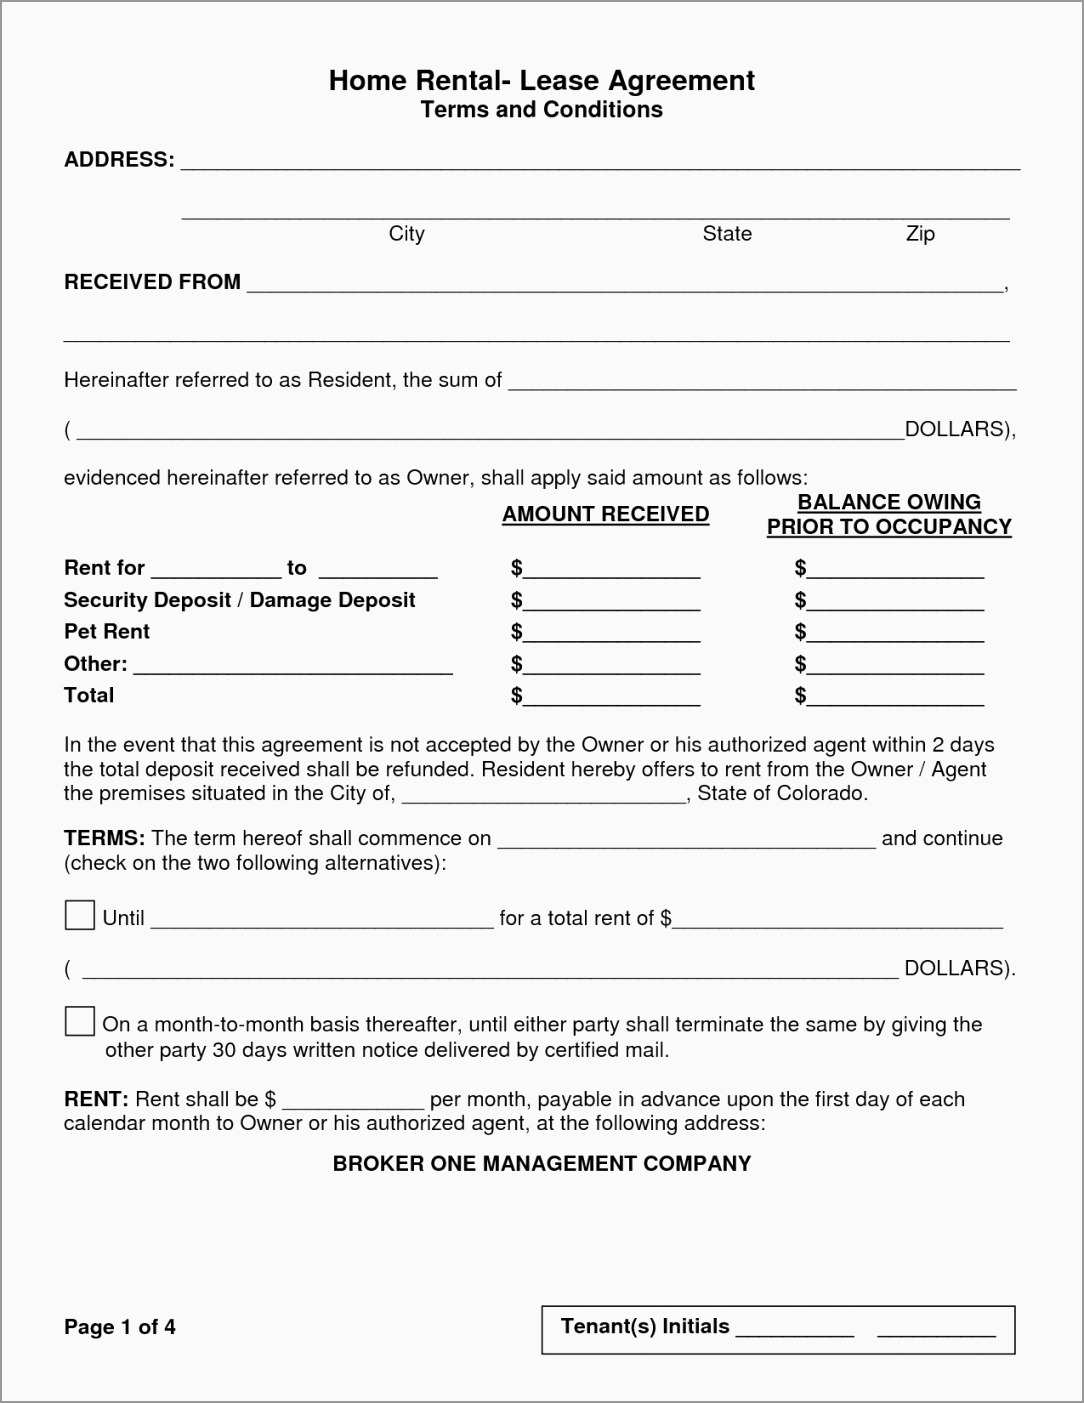 Timeshare Rental Agreement Free Vacation Rental Agreement Template Pretty Home Lease Agreement